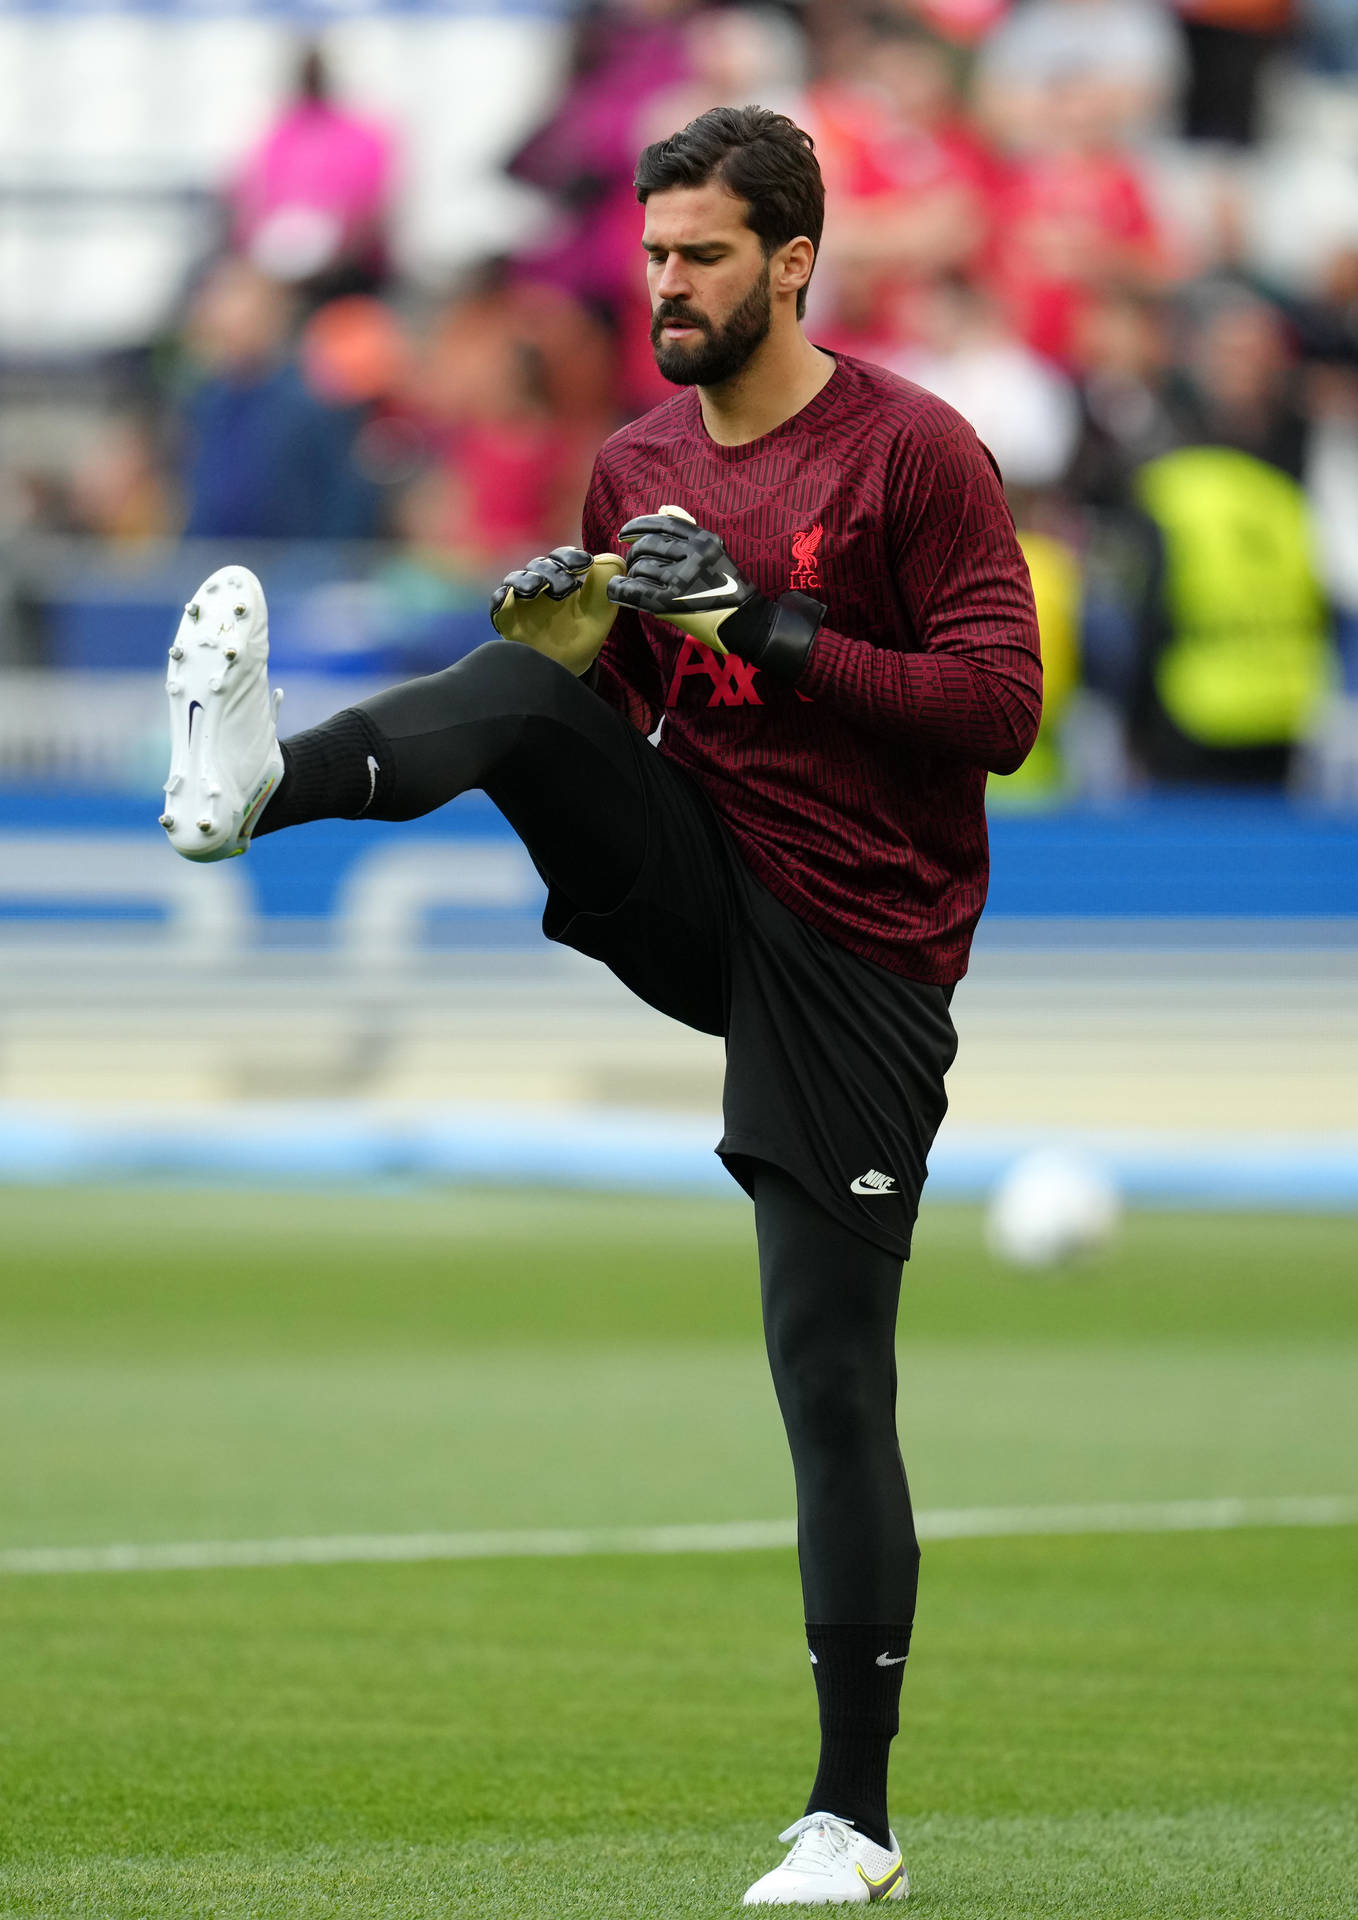 Alissonbecker Ben Upp (this Translation Has Contextual Ambiguity, But Could Be Interpreted As 